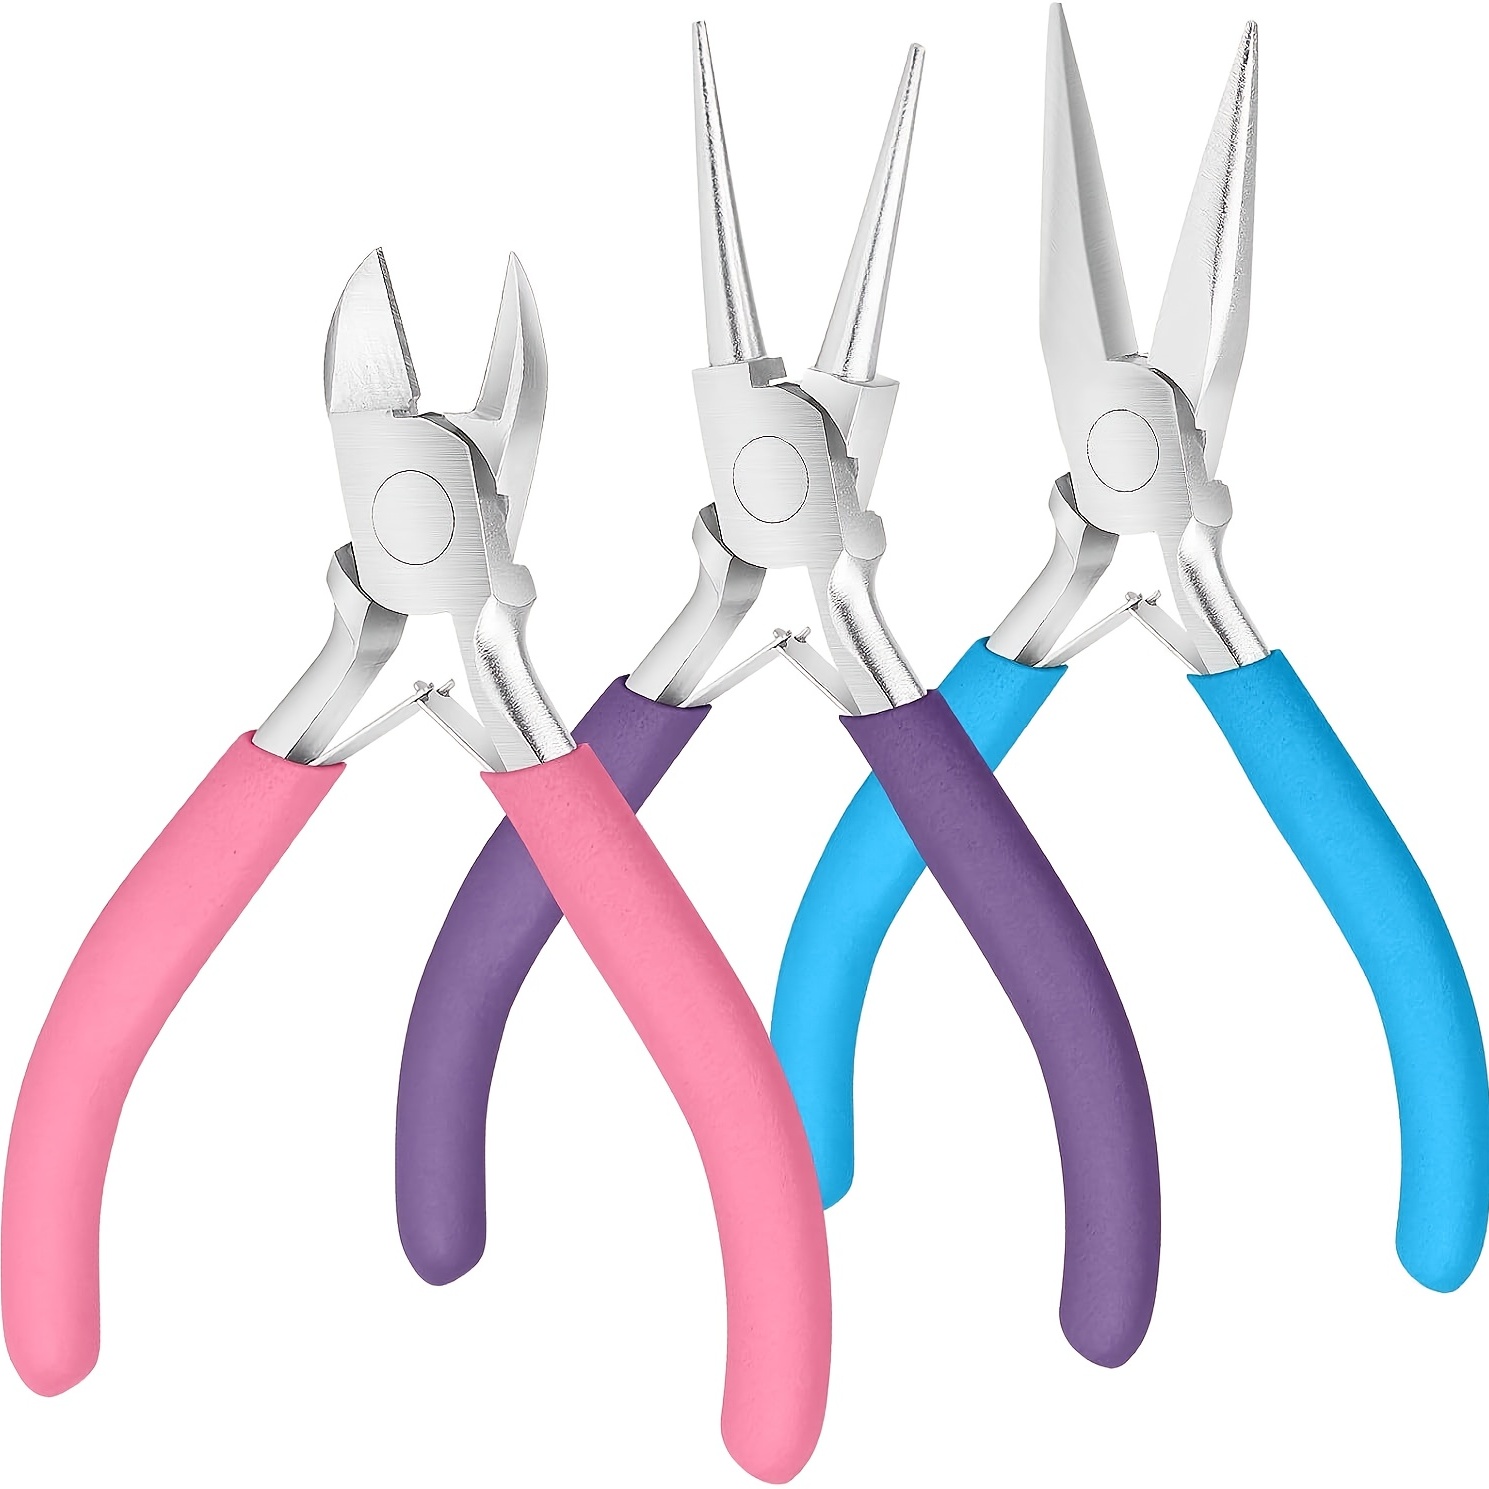 4.5 Inch 3-Step Wire Ring Looping Pliers Mini Precision Round Flat Nose  Combination Pliers Tools for DIY Jewelry Making Pink 